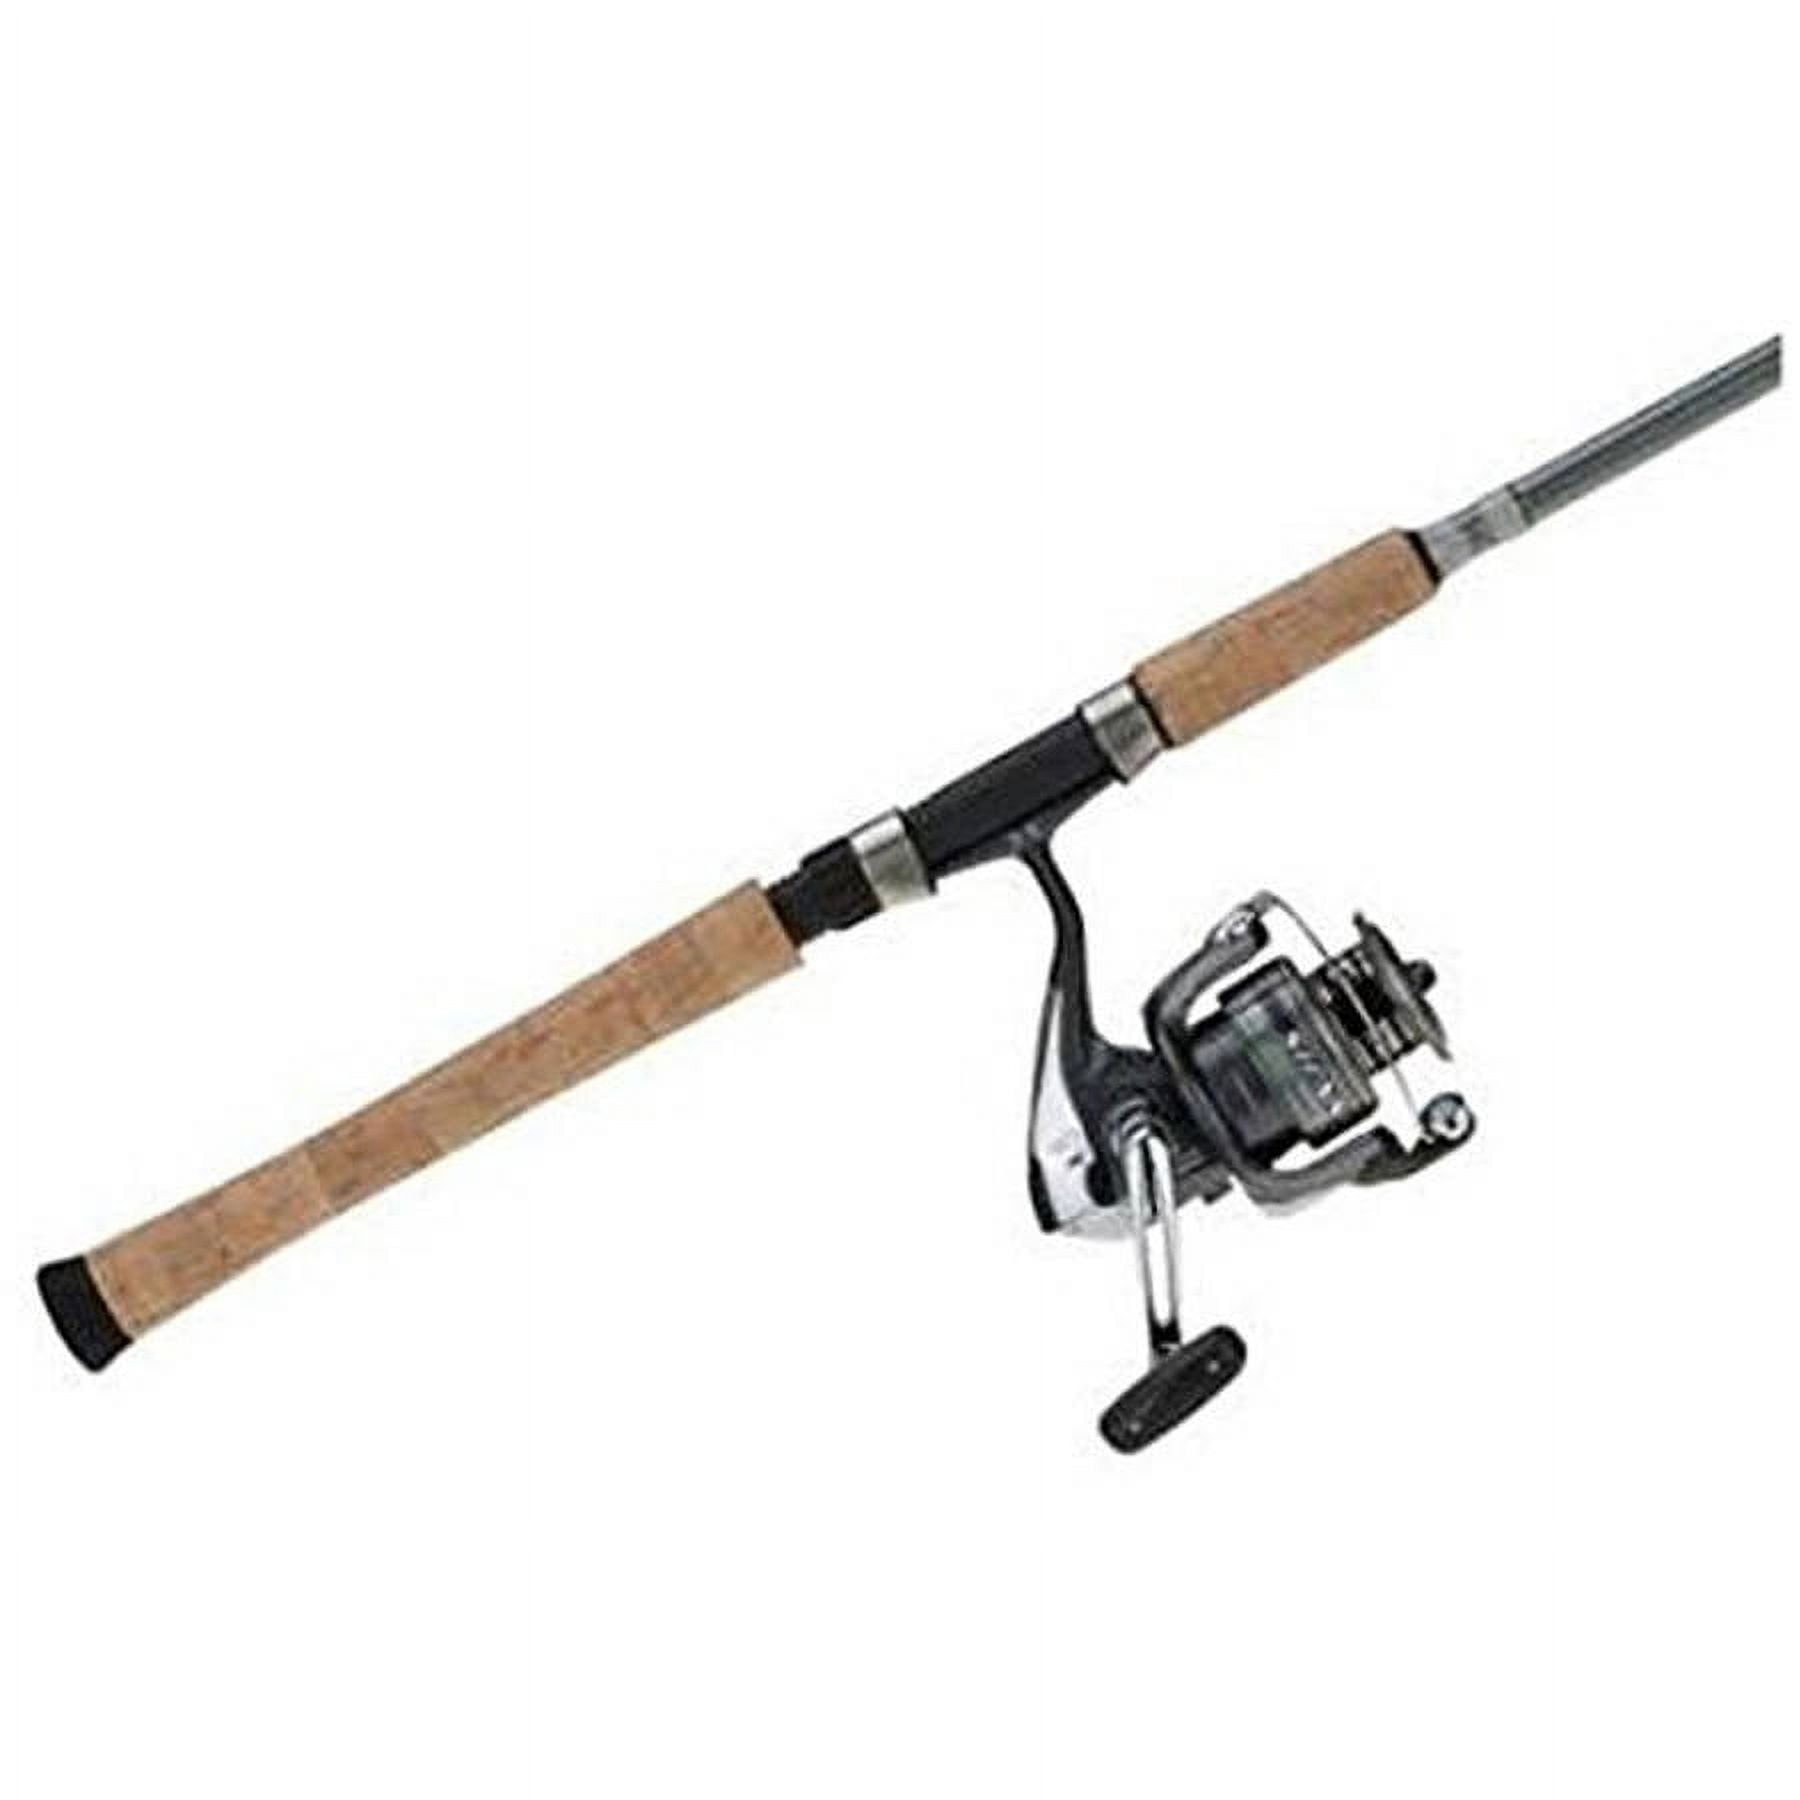 Shimano Sienna Ice Rod/Reel Combo (Red) - Rat River Outdoors Inc.